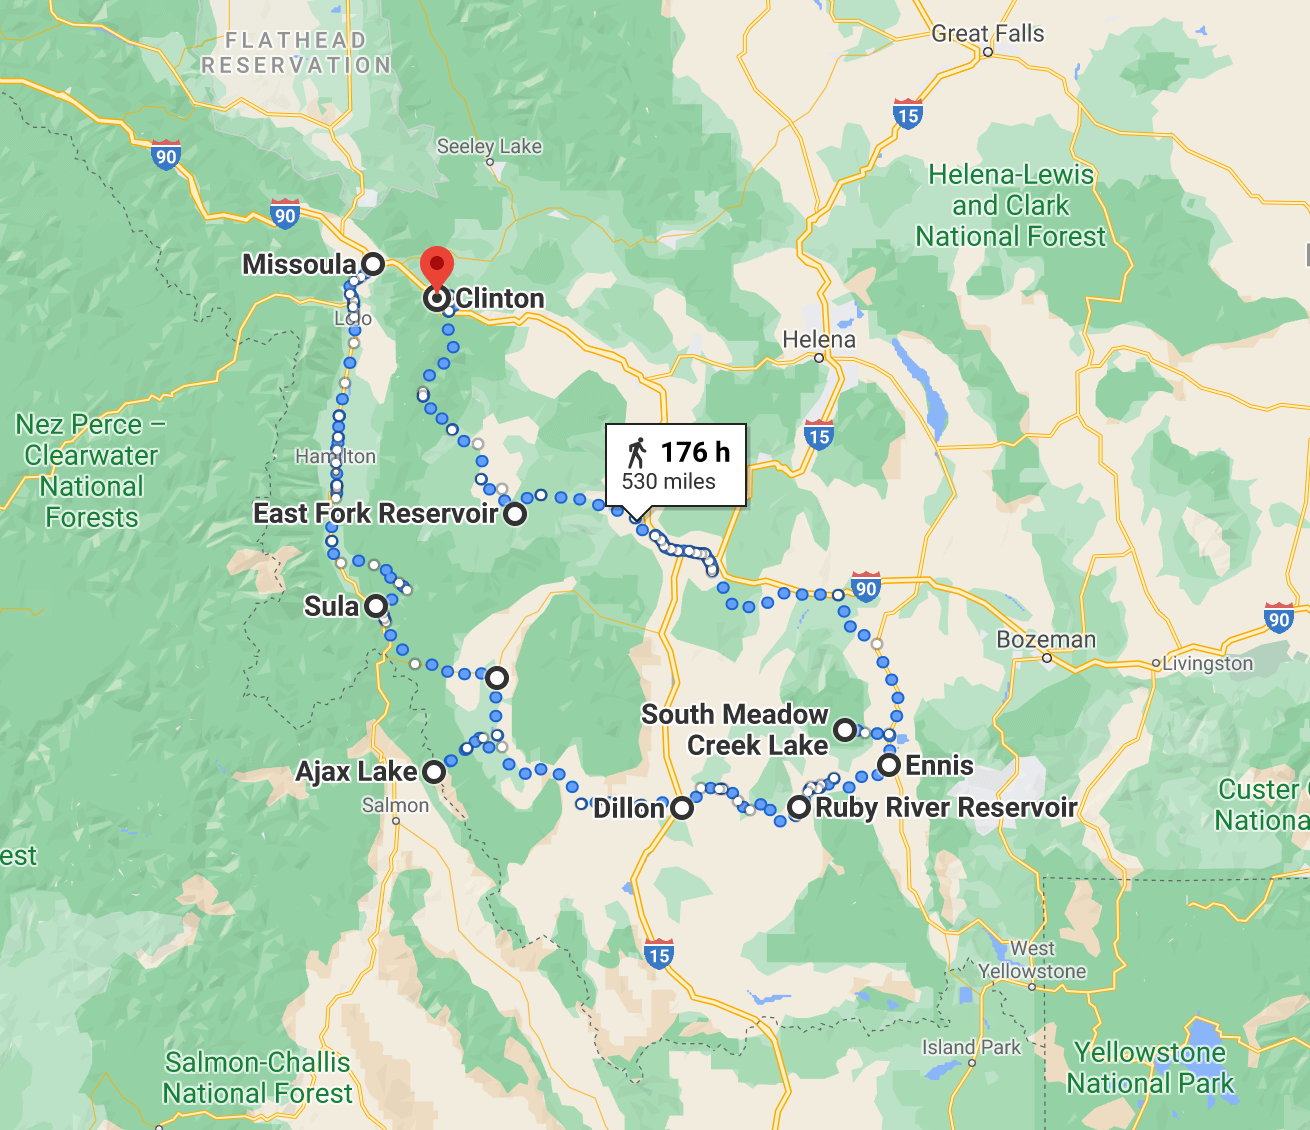 Not really the route we did, but close enough to give you a loose idea. Between S Missoula and NW Yellowstone the entire time.